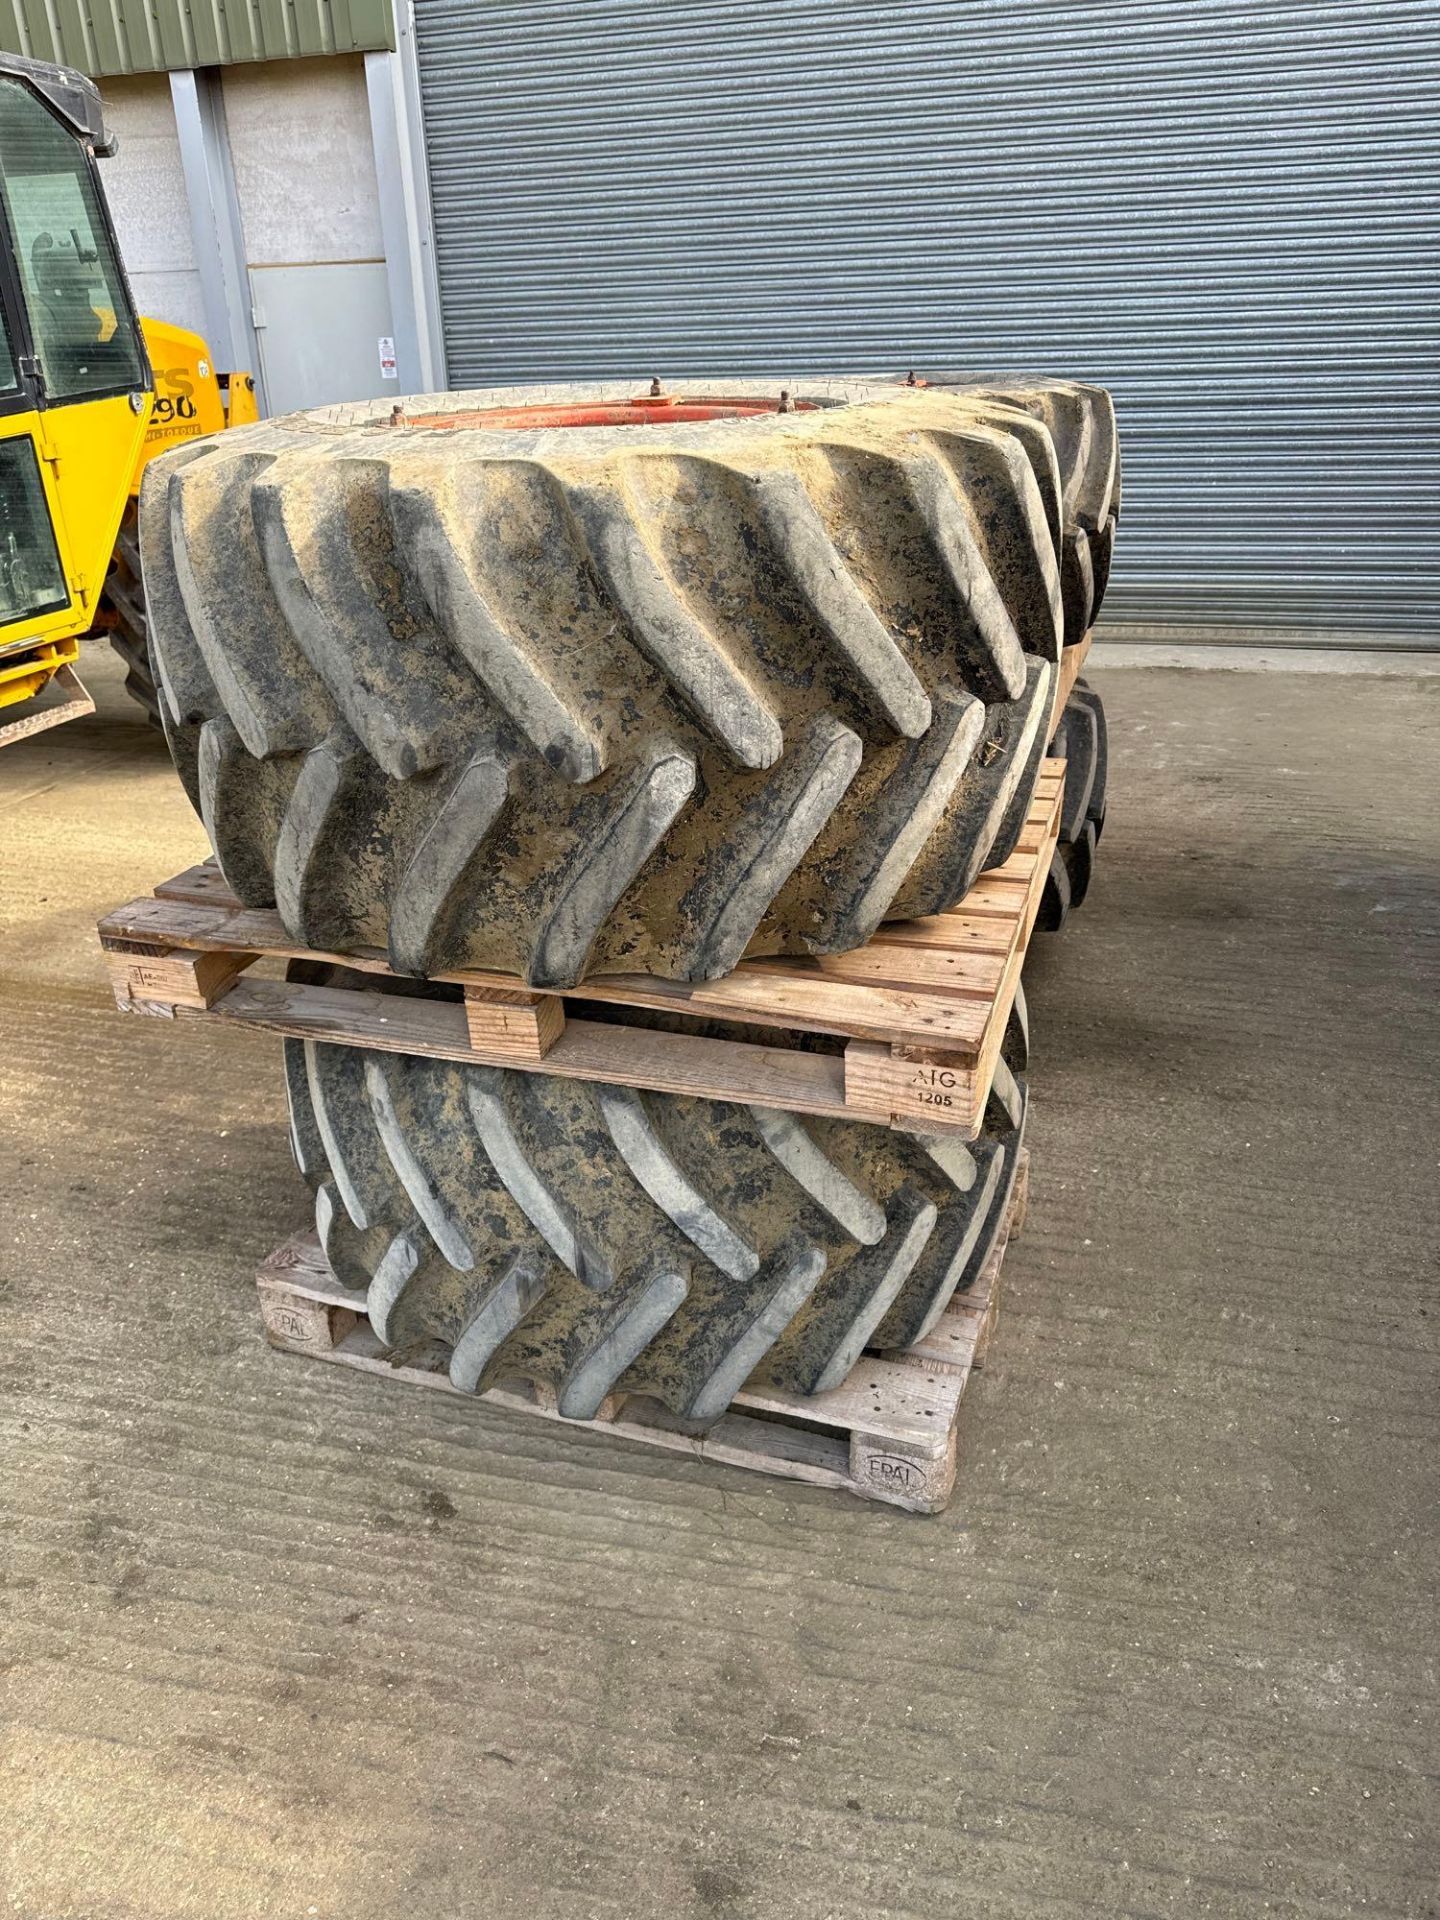 Set 48x25.00-26 Flotation wheels and tyres to suit SAM sprayer